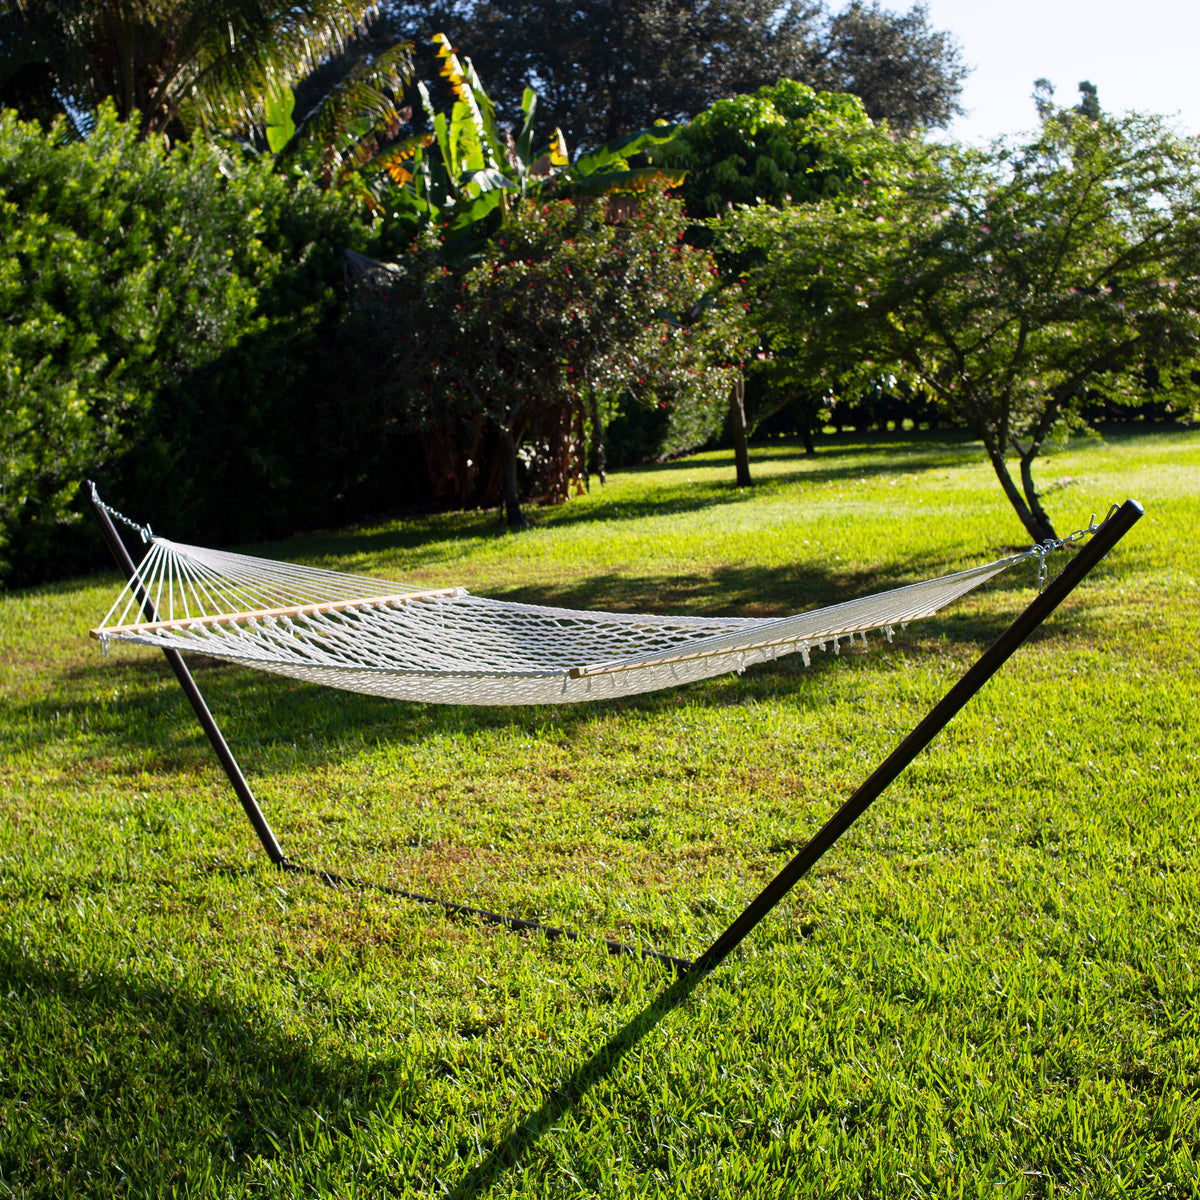 Bliss Hammocks 60-inch Wide Polyester Rope Hammock with spreader bars attached to a hammock stand outside in the grass.